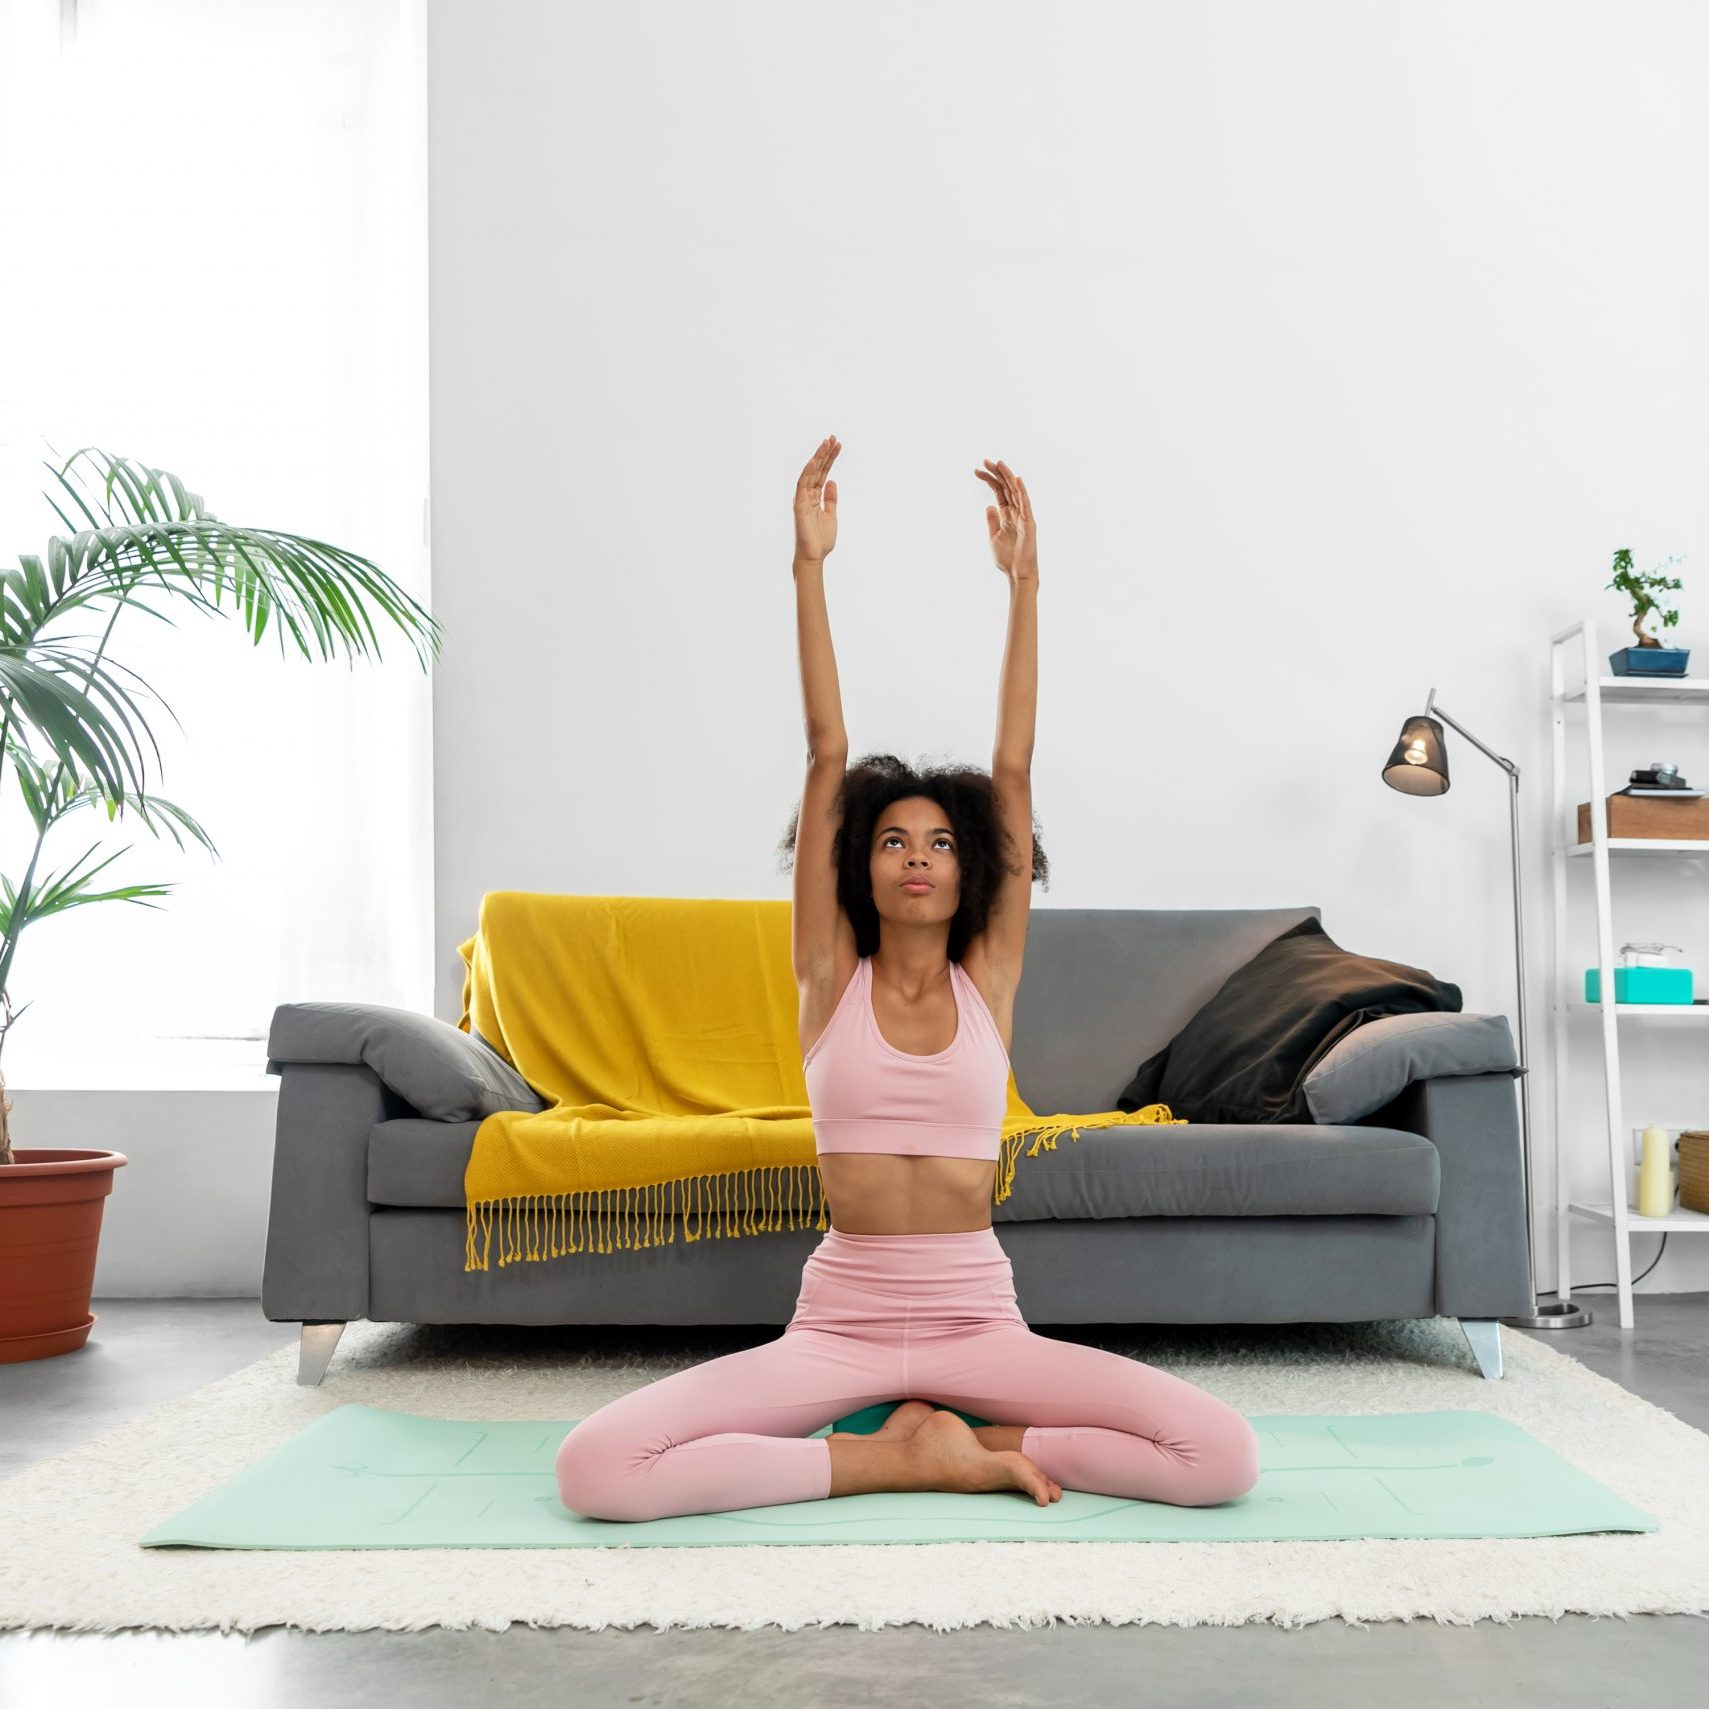 Afro woman practicing yoga at home